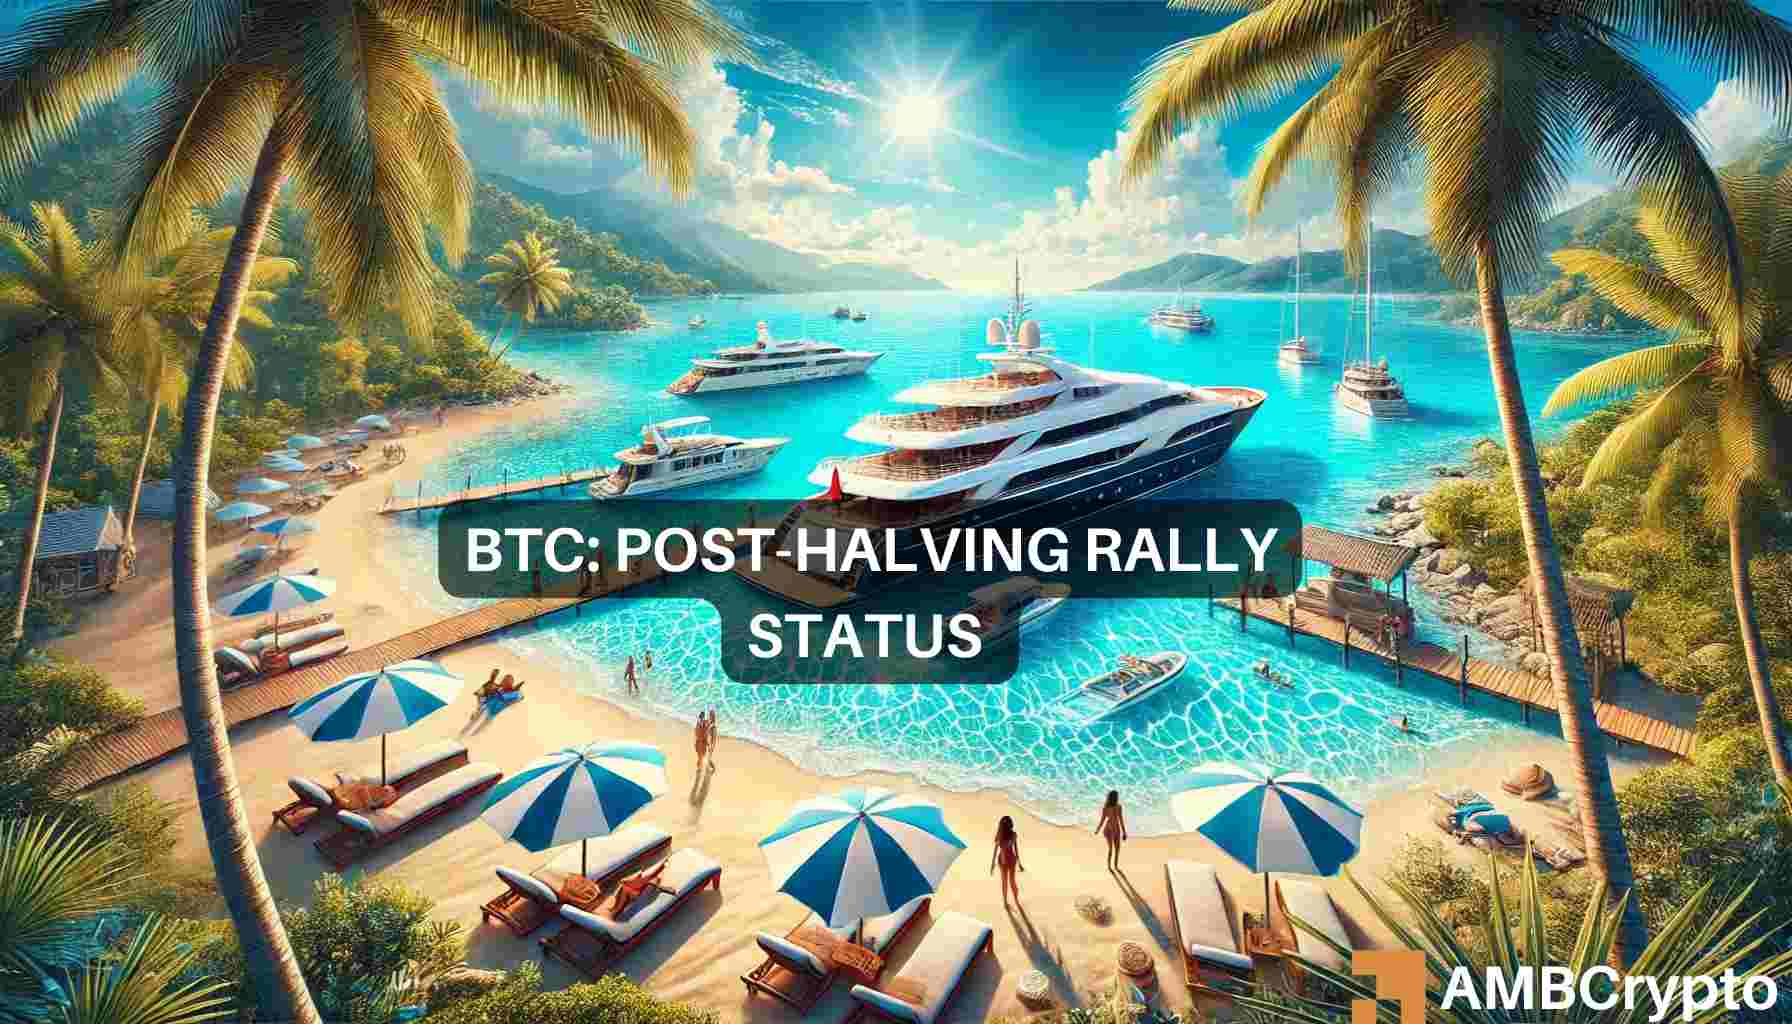 Bitcoin’s big question: Is the post-halving BTC rally still on the cards?